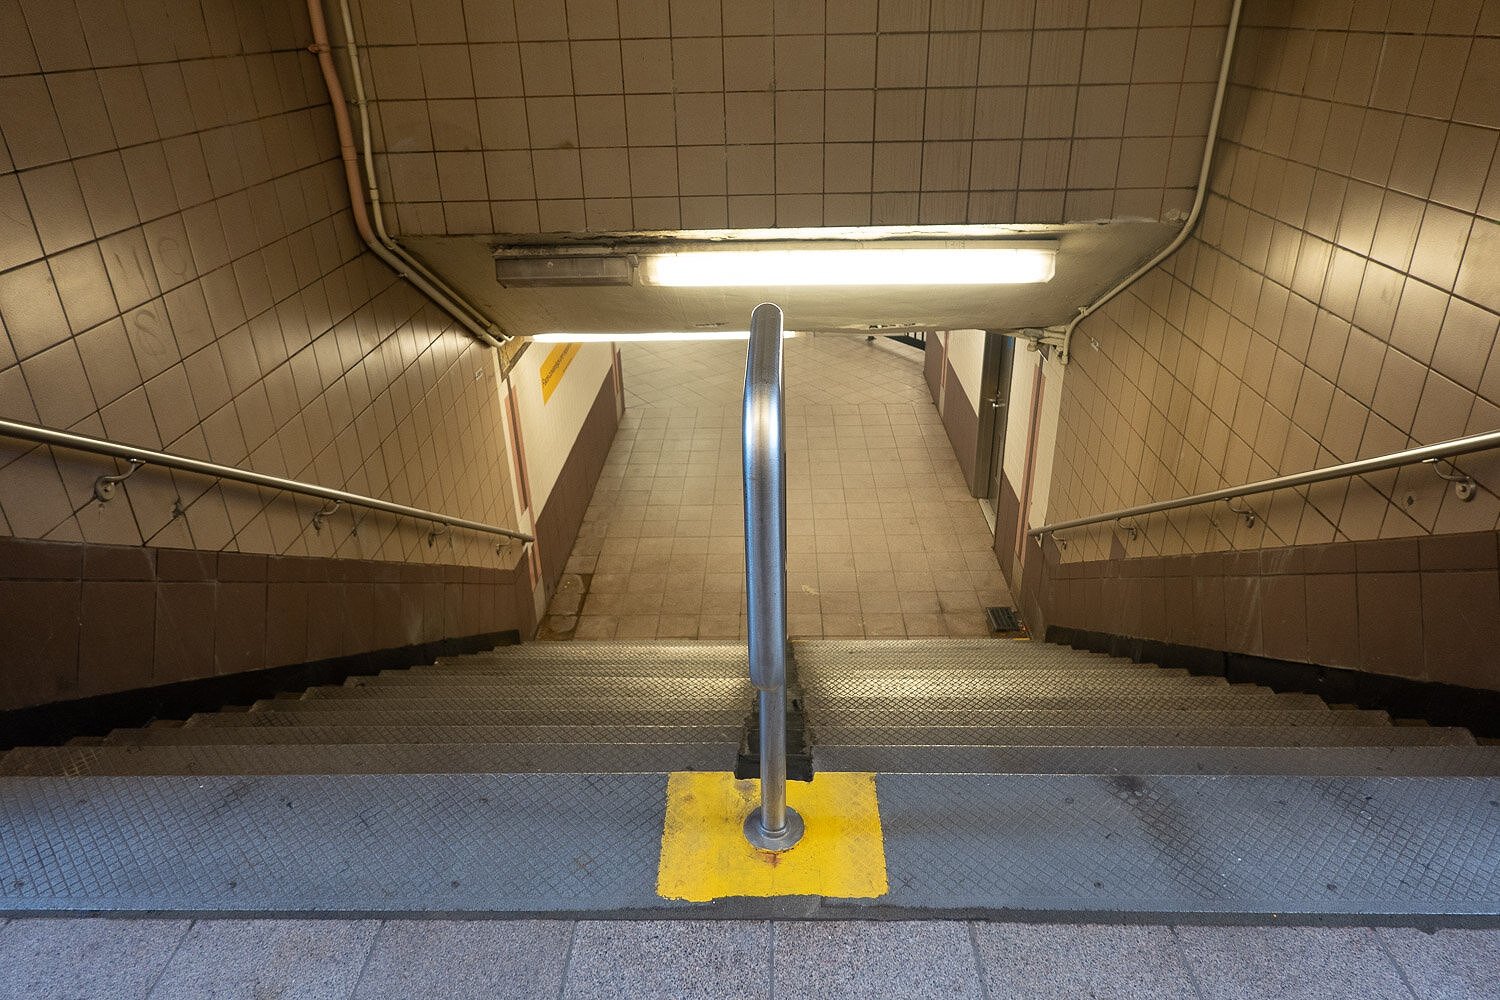 Steps to the subway, pandemic